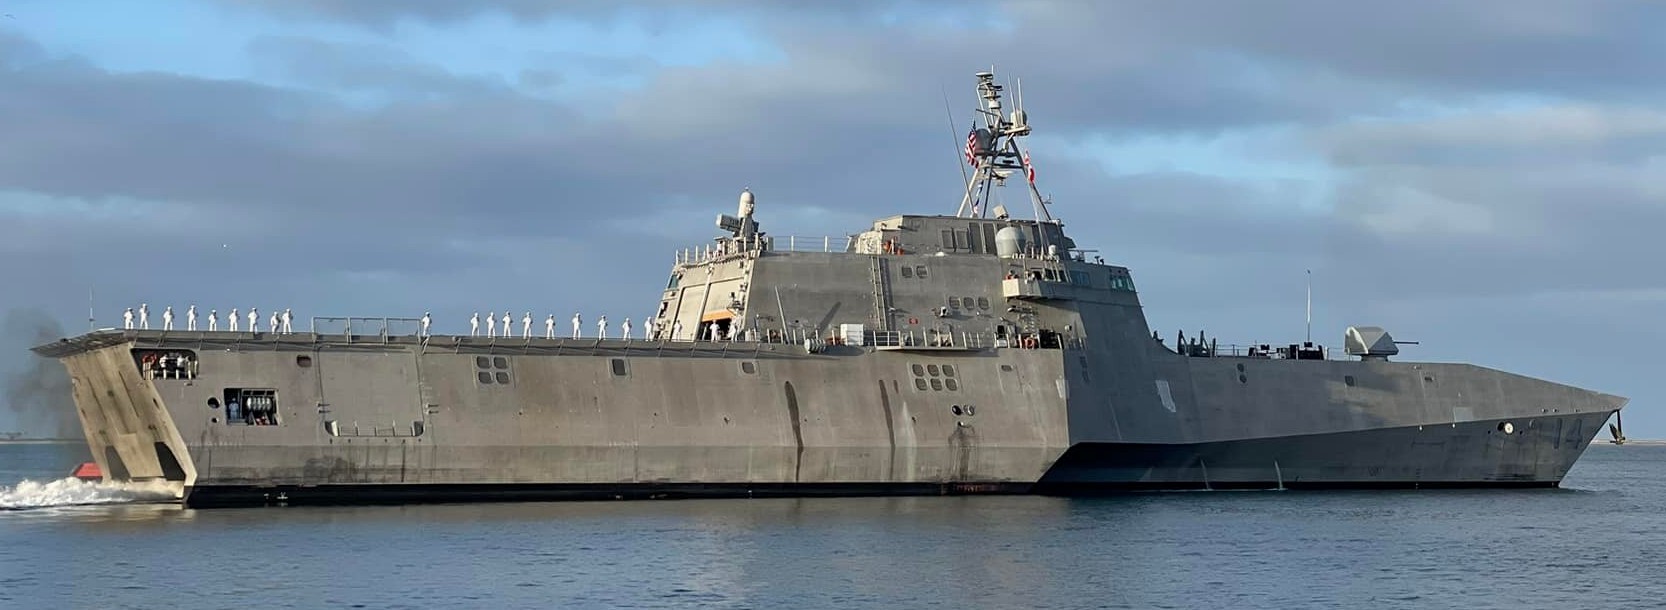 lcs-14 uss manchester littoral combat ship independence class us navy 26